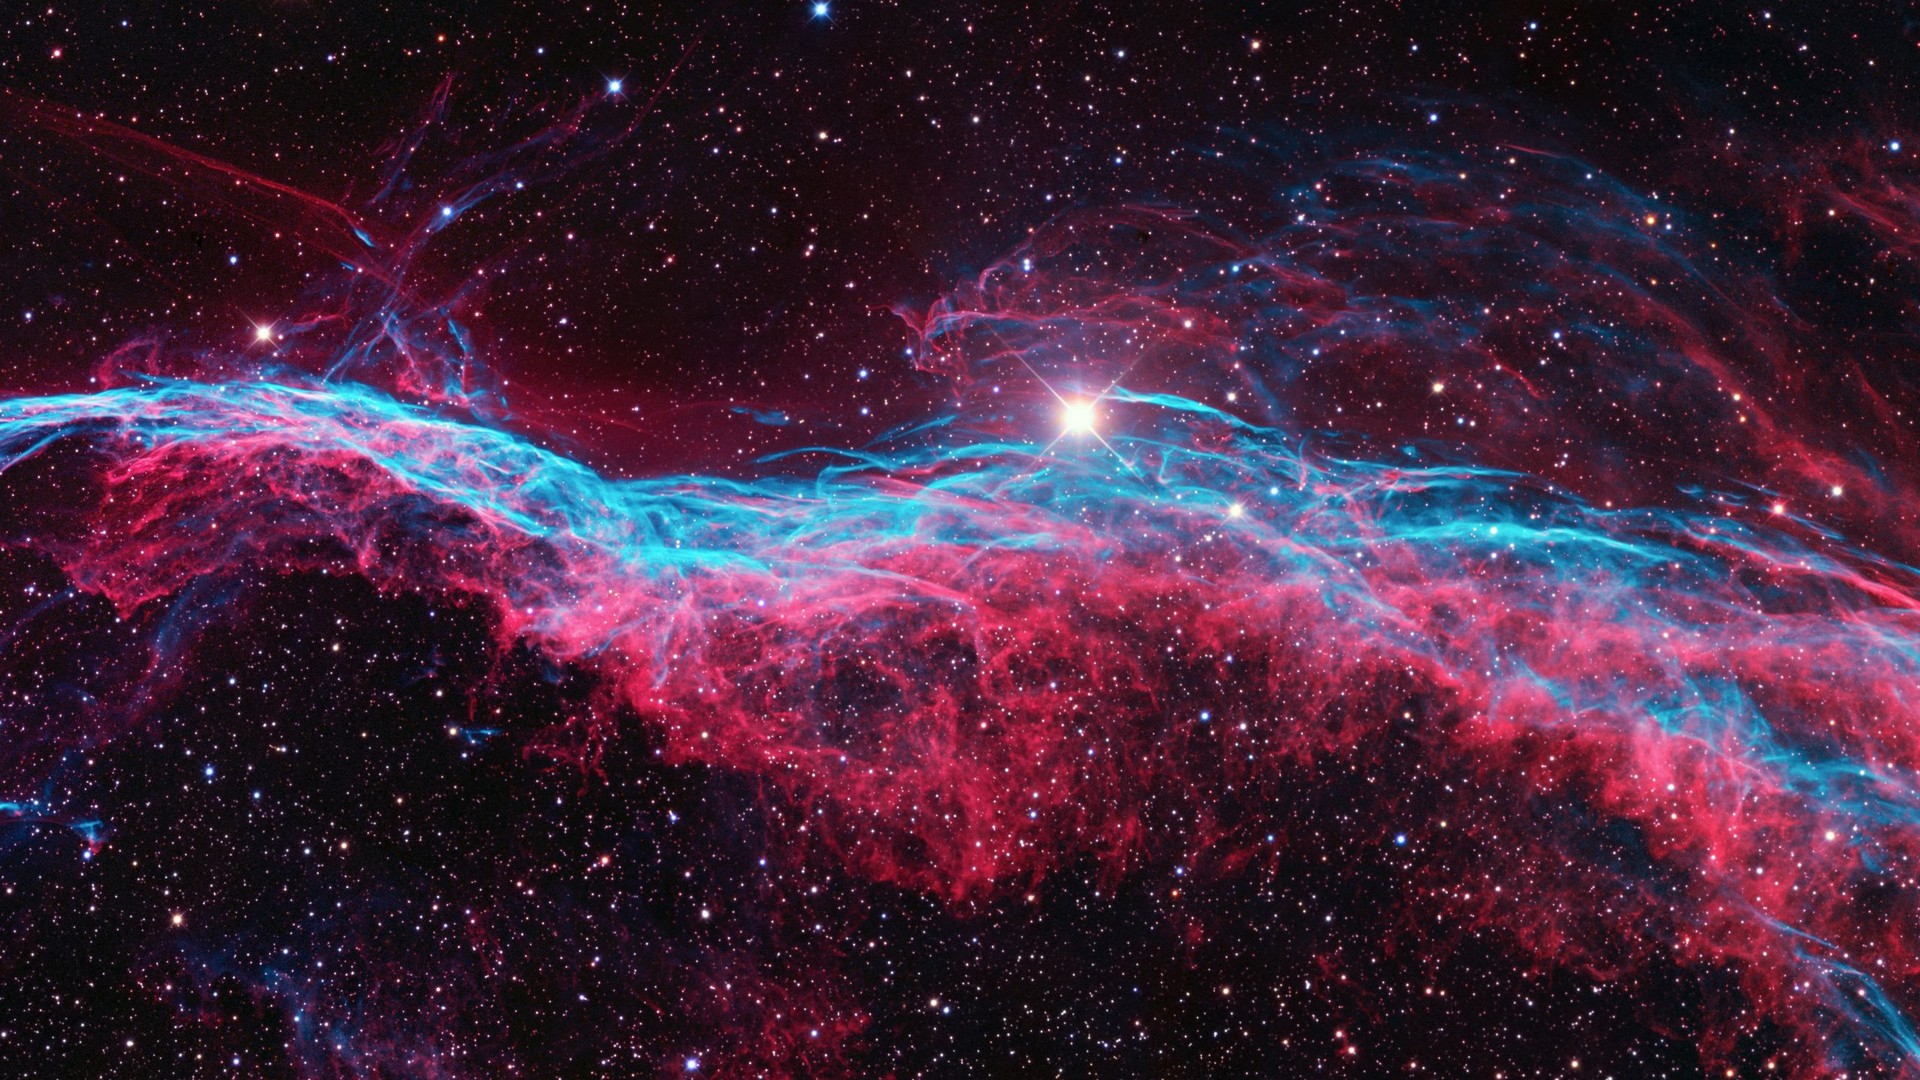 HD Space Backgrounds with high-resolution 1920x1080 pixel. You can use this wallpaper for your Windows and Mac OS computers as well as your Android and iPhone smartphones